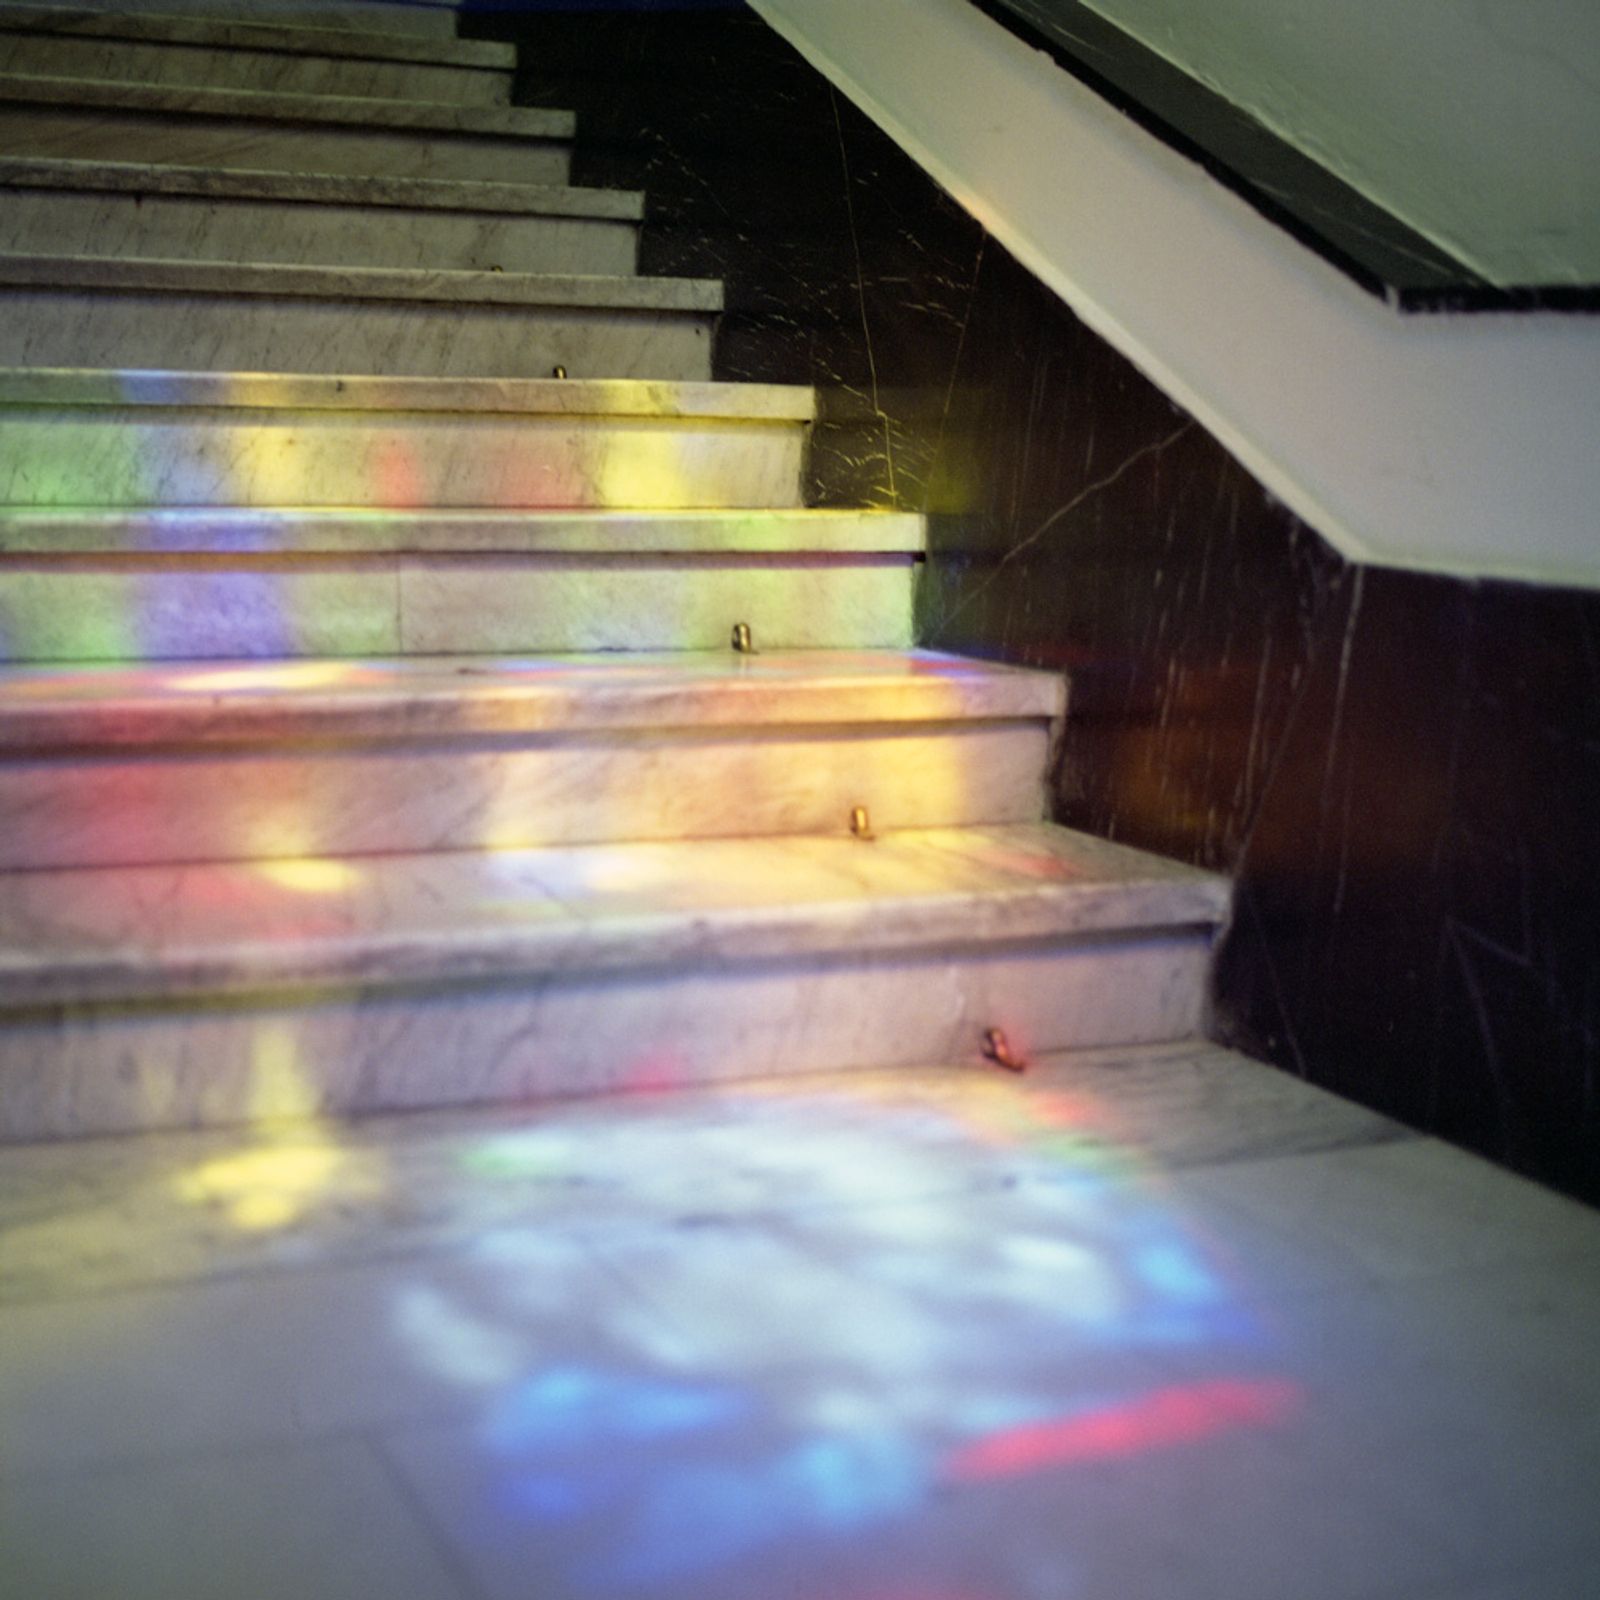 © Chiara Fossati - The reflection of a stained glass window on the stairs of a photography museum in Budapest, Hungary.